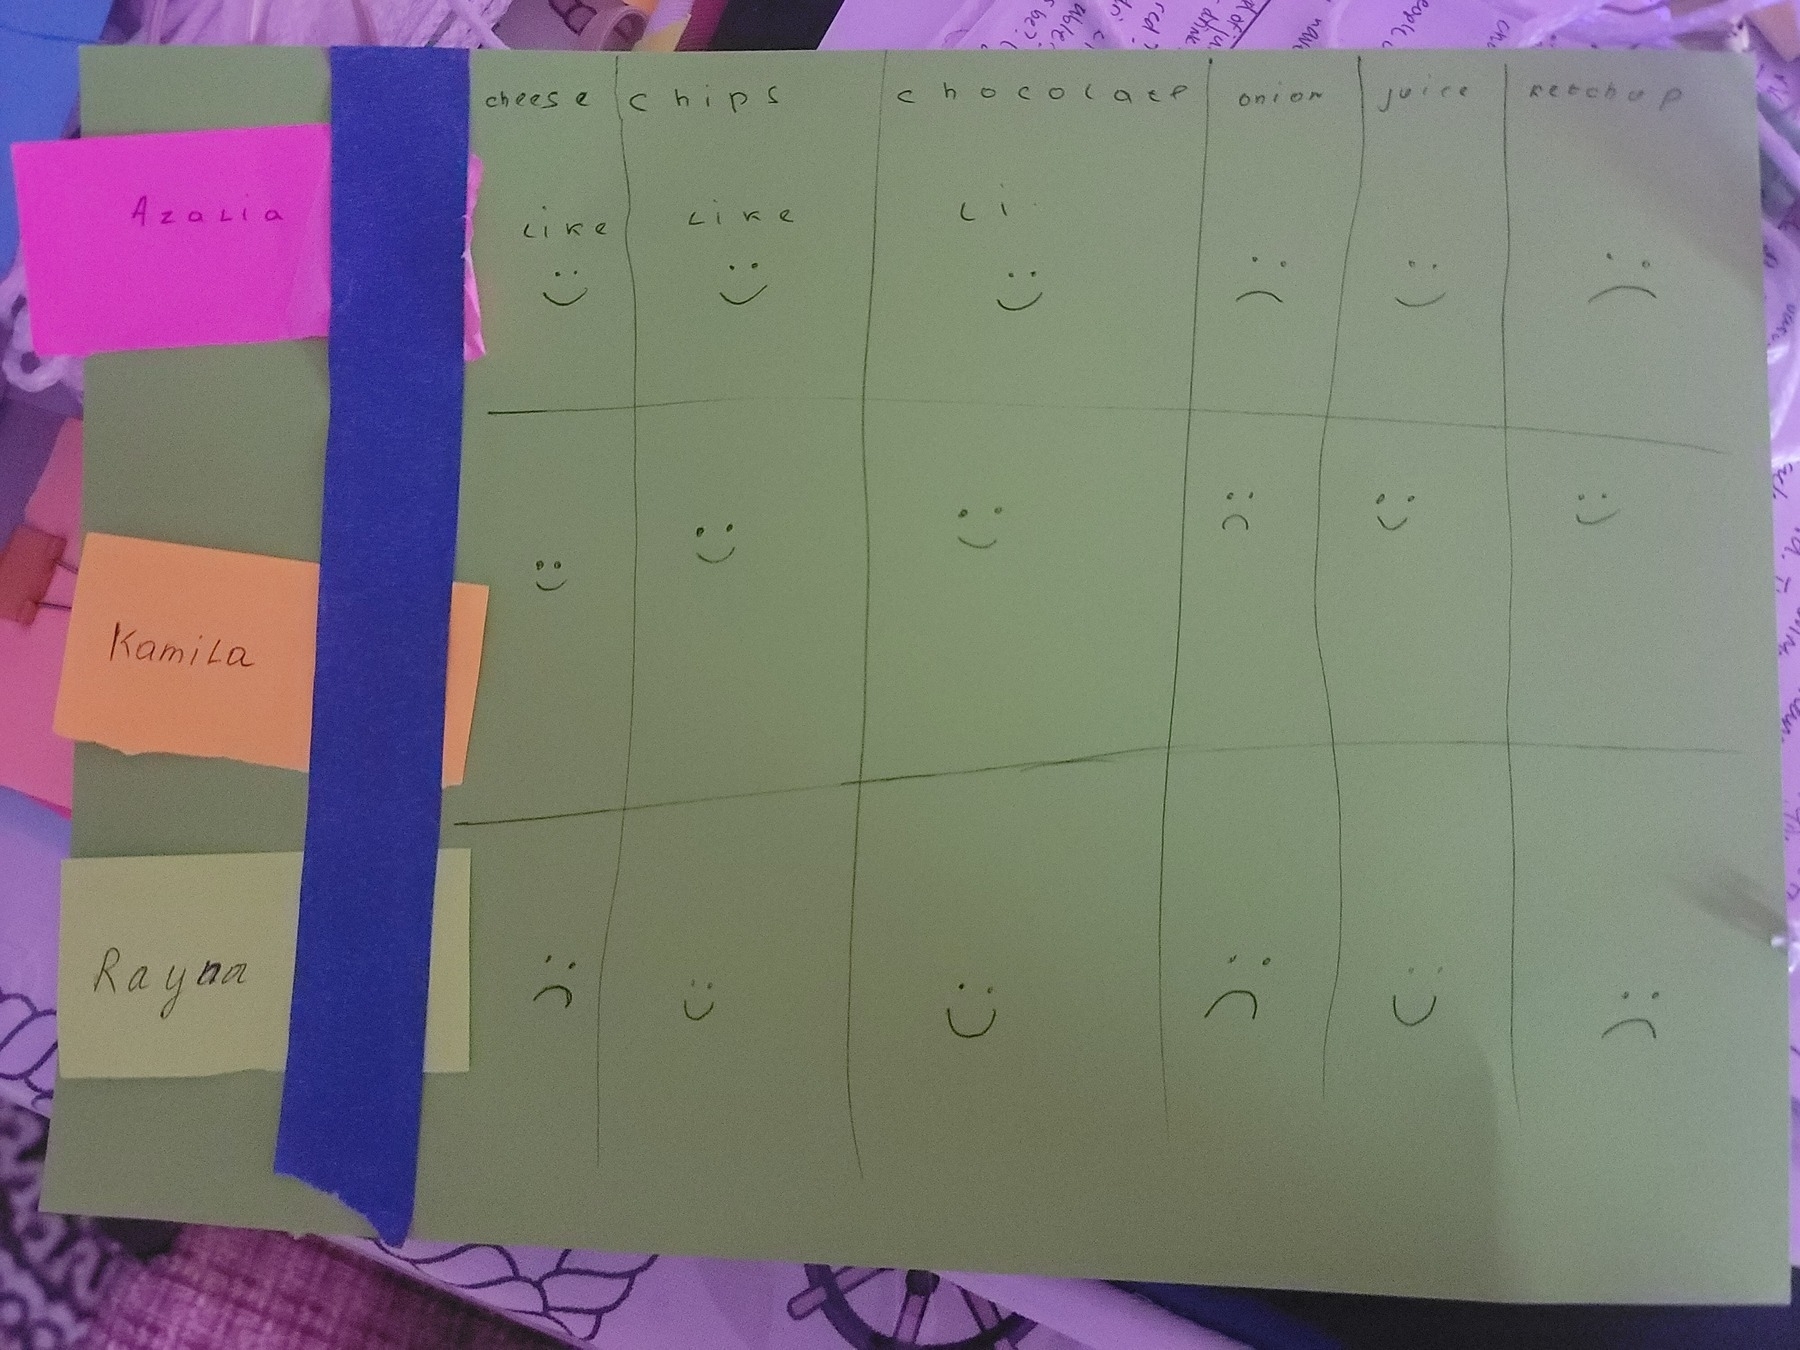 paper chart. rows labeled with names (3) and columns labeled with food/drink (6). Each cell has a happy or sad face, correlating with 'like' and 'don't like' respectively 